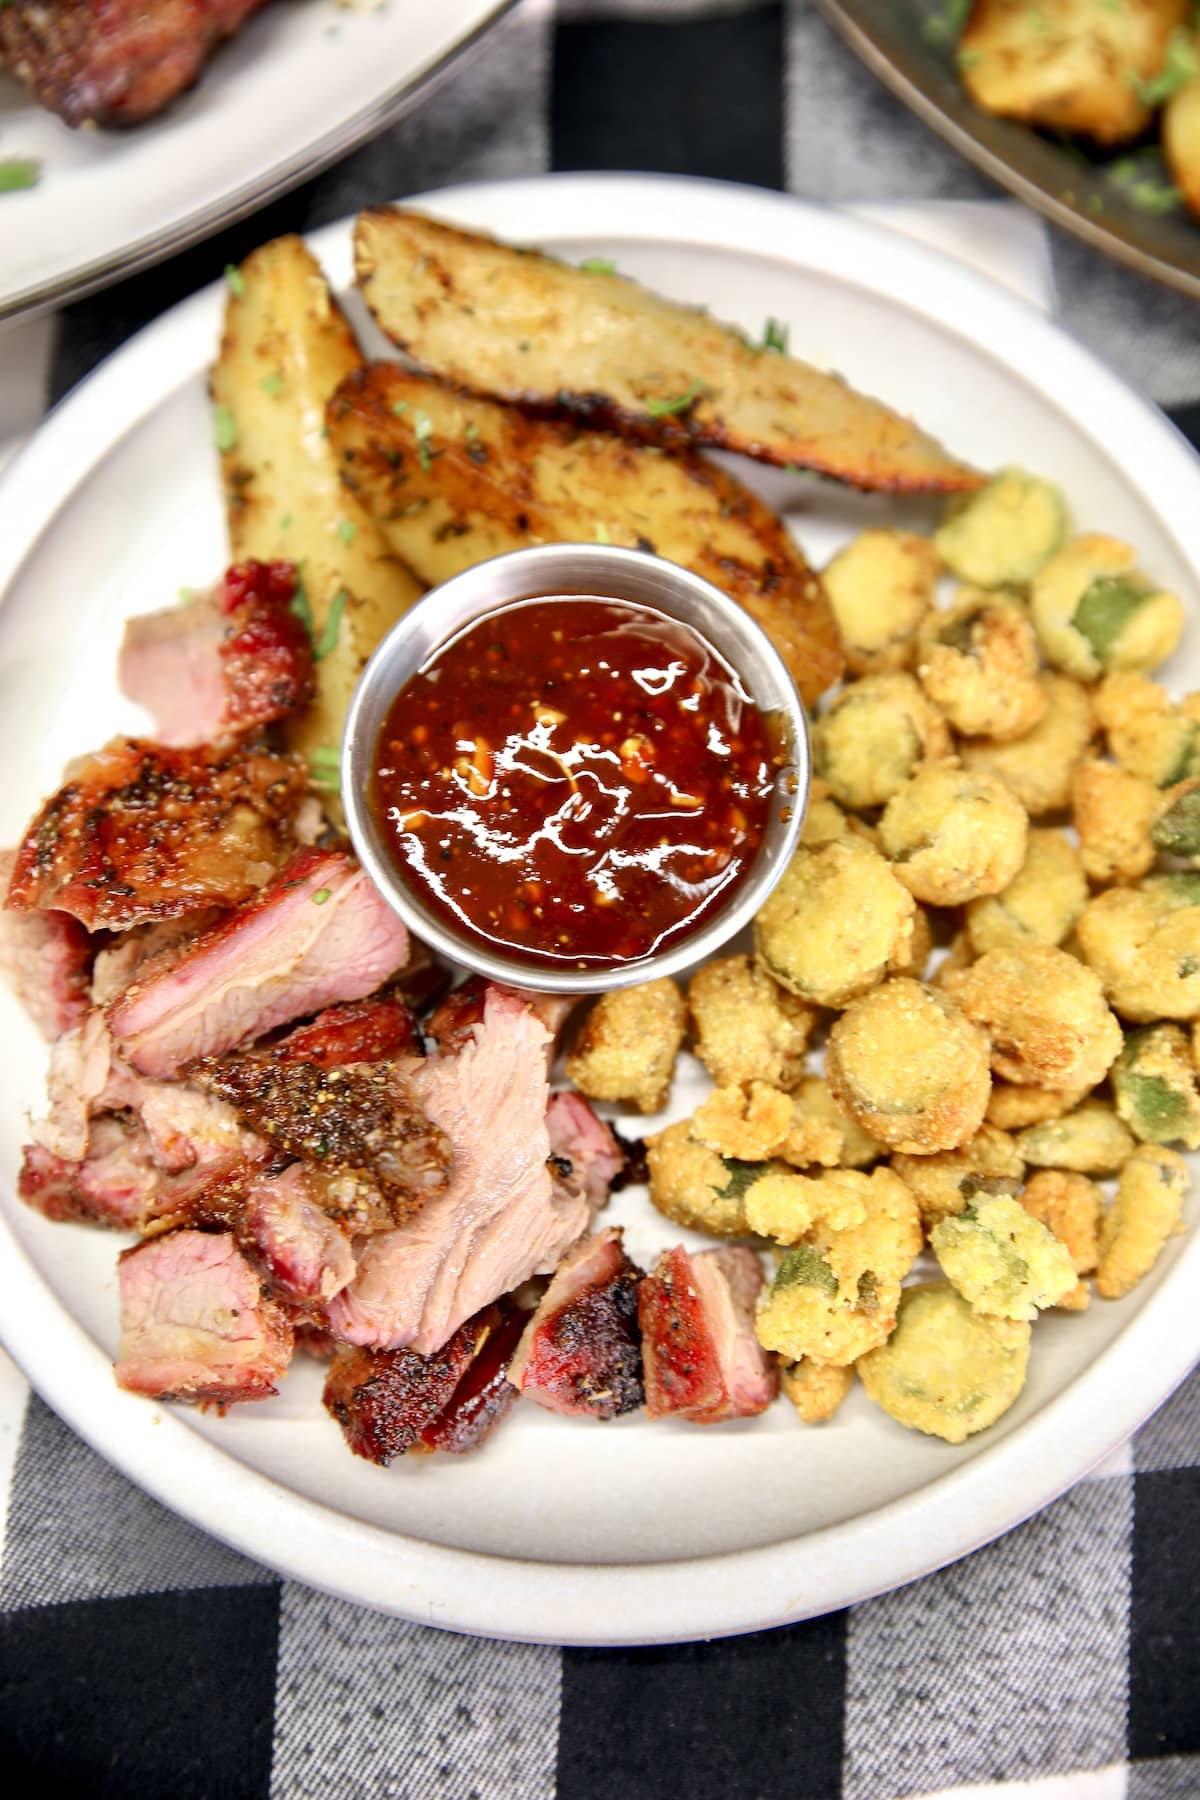 Sliced beef ribs on a plate with fried okra, potatoes and bbq sauce.